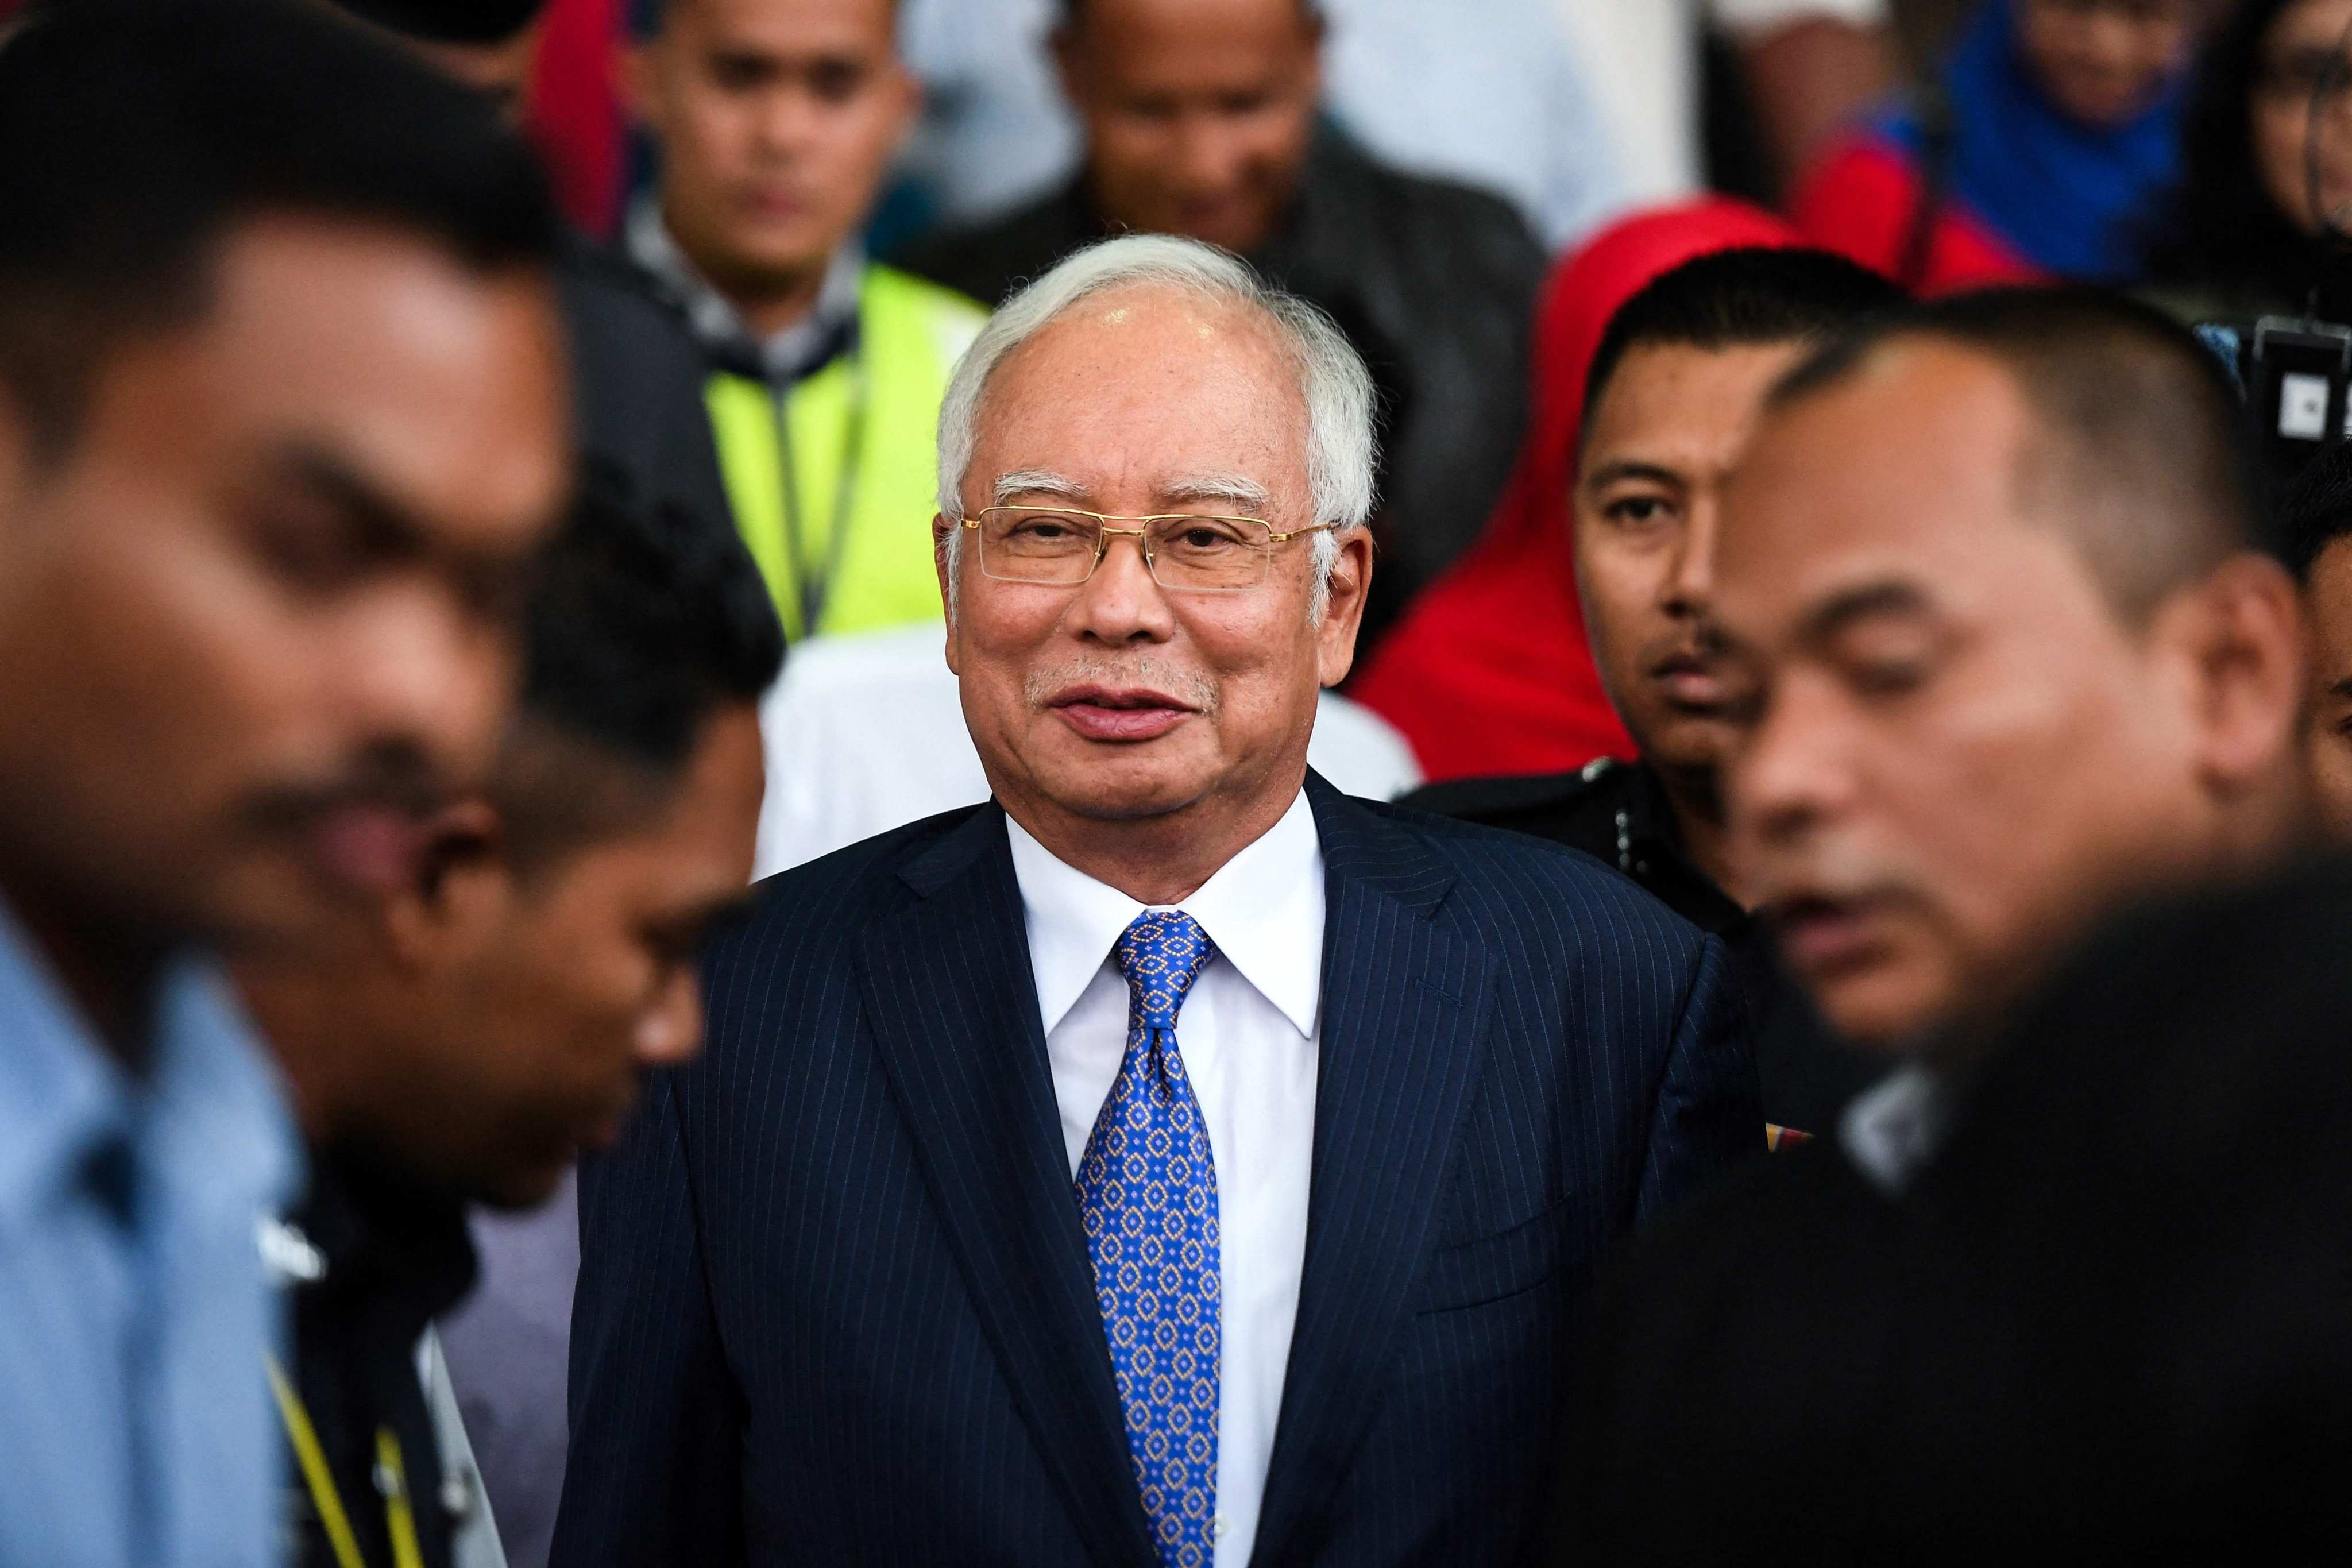 Najib Razak leaves a court in Kuala Lumpur in 2019. Anger has poured out across Malaysian social media at the 70-year-old disgraced former leader’s perceived preferential treatment. Photo: AFP